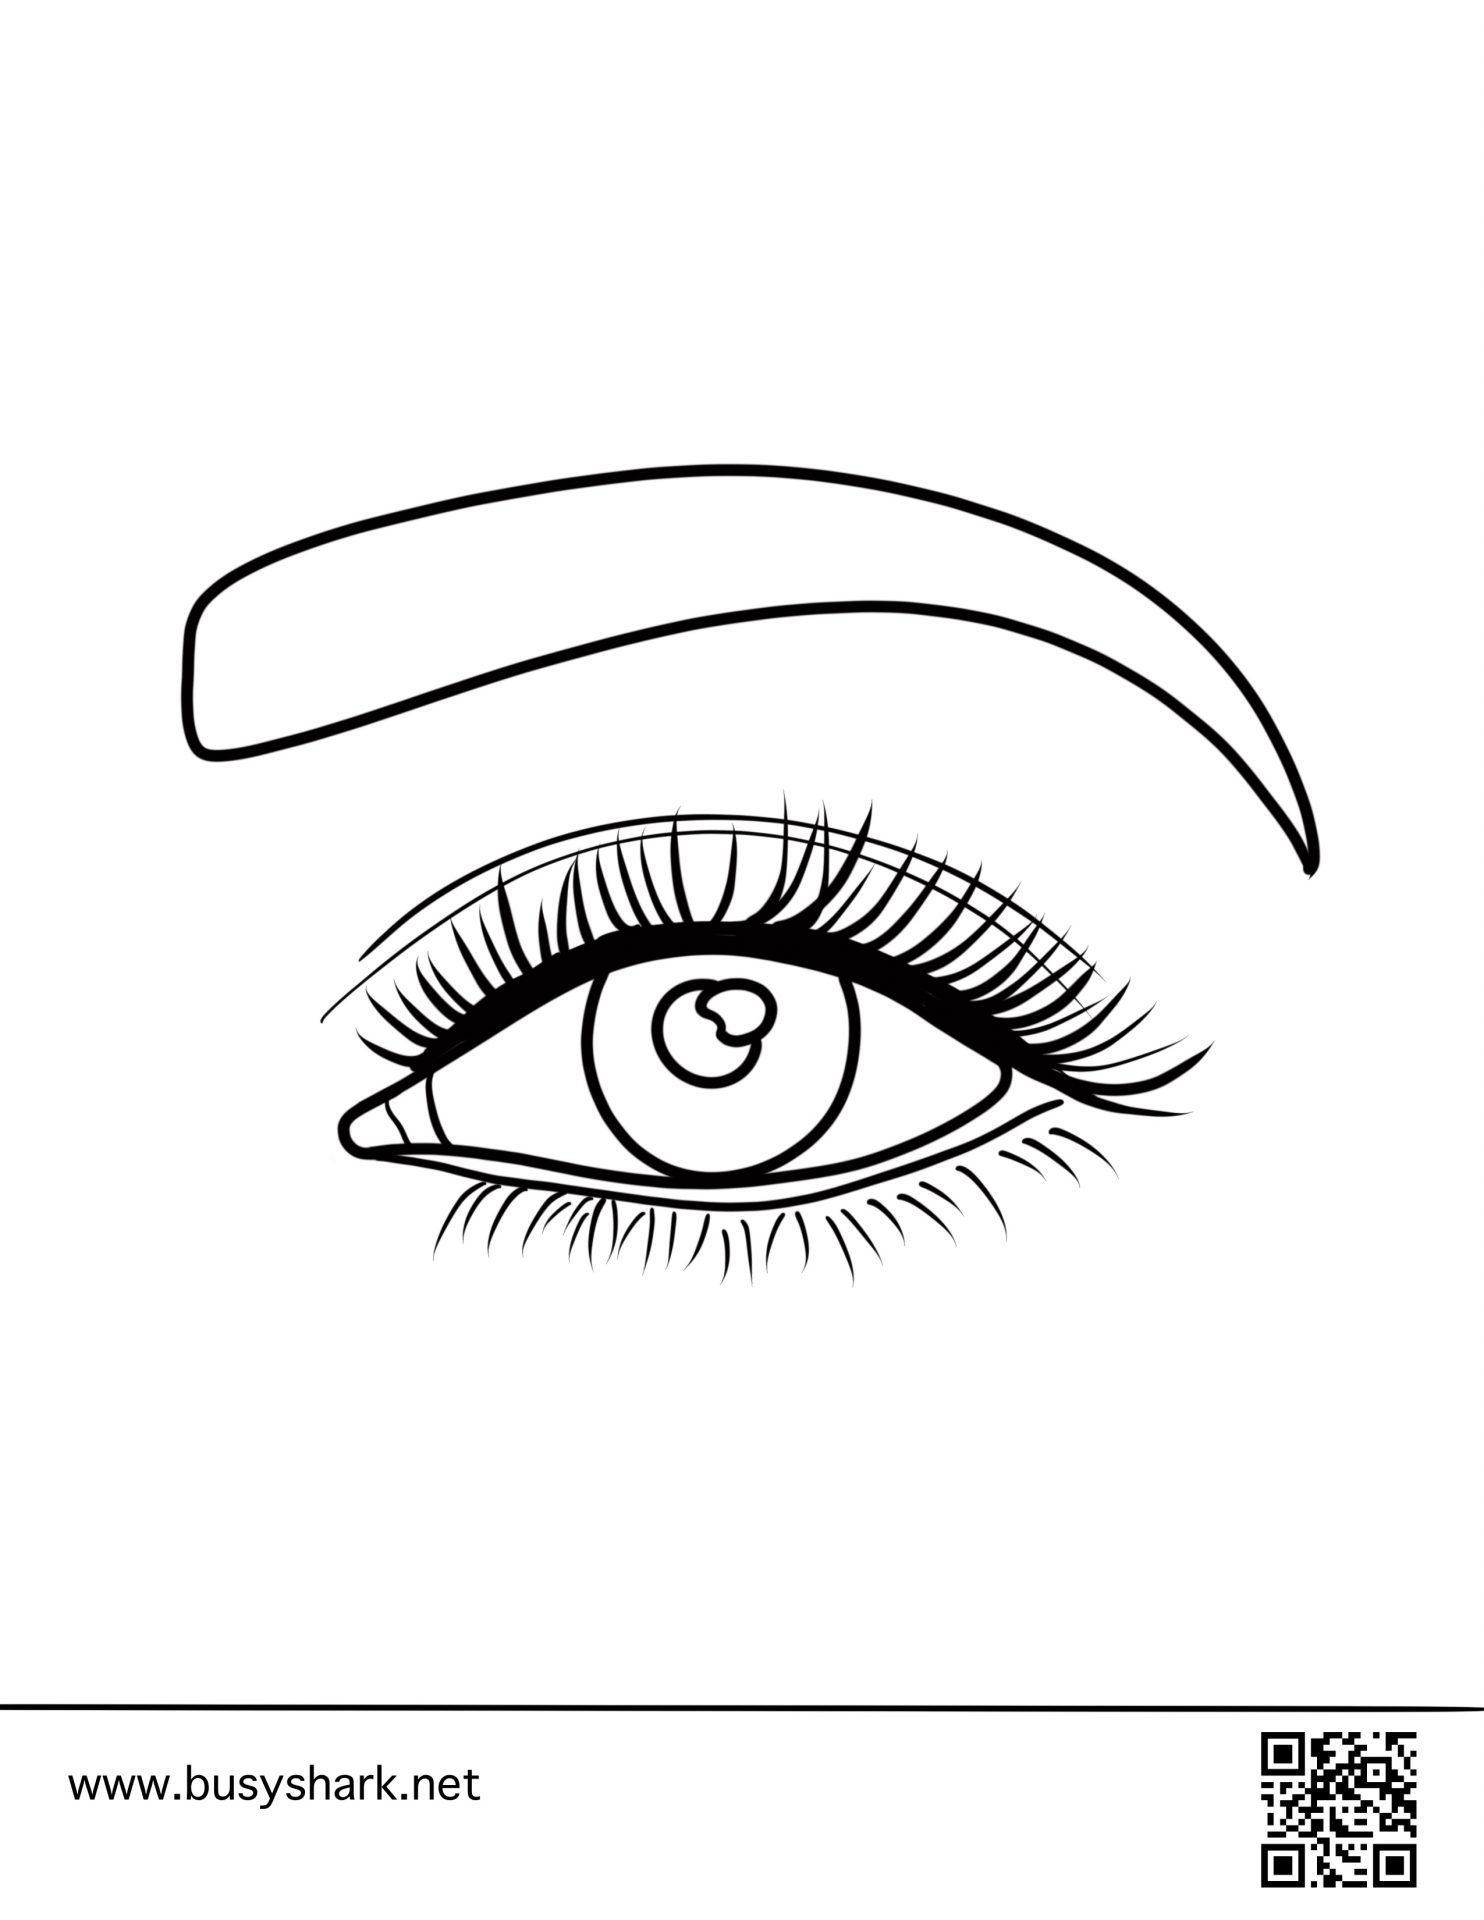 Free female eye eyebrow coloring page